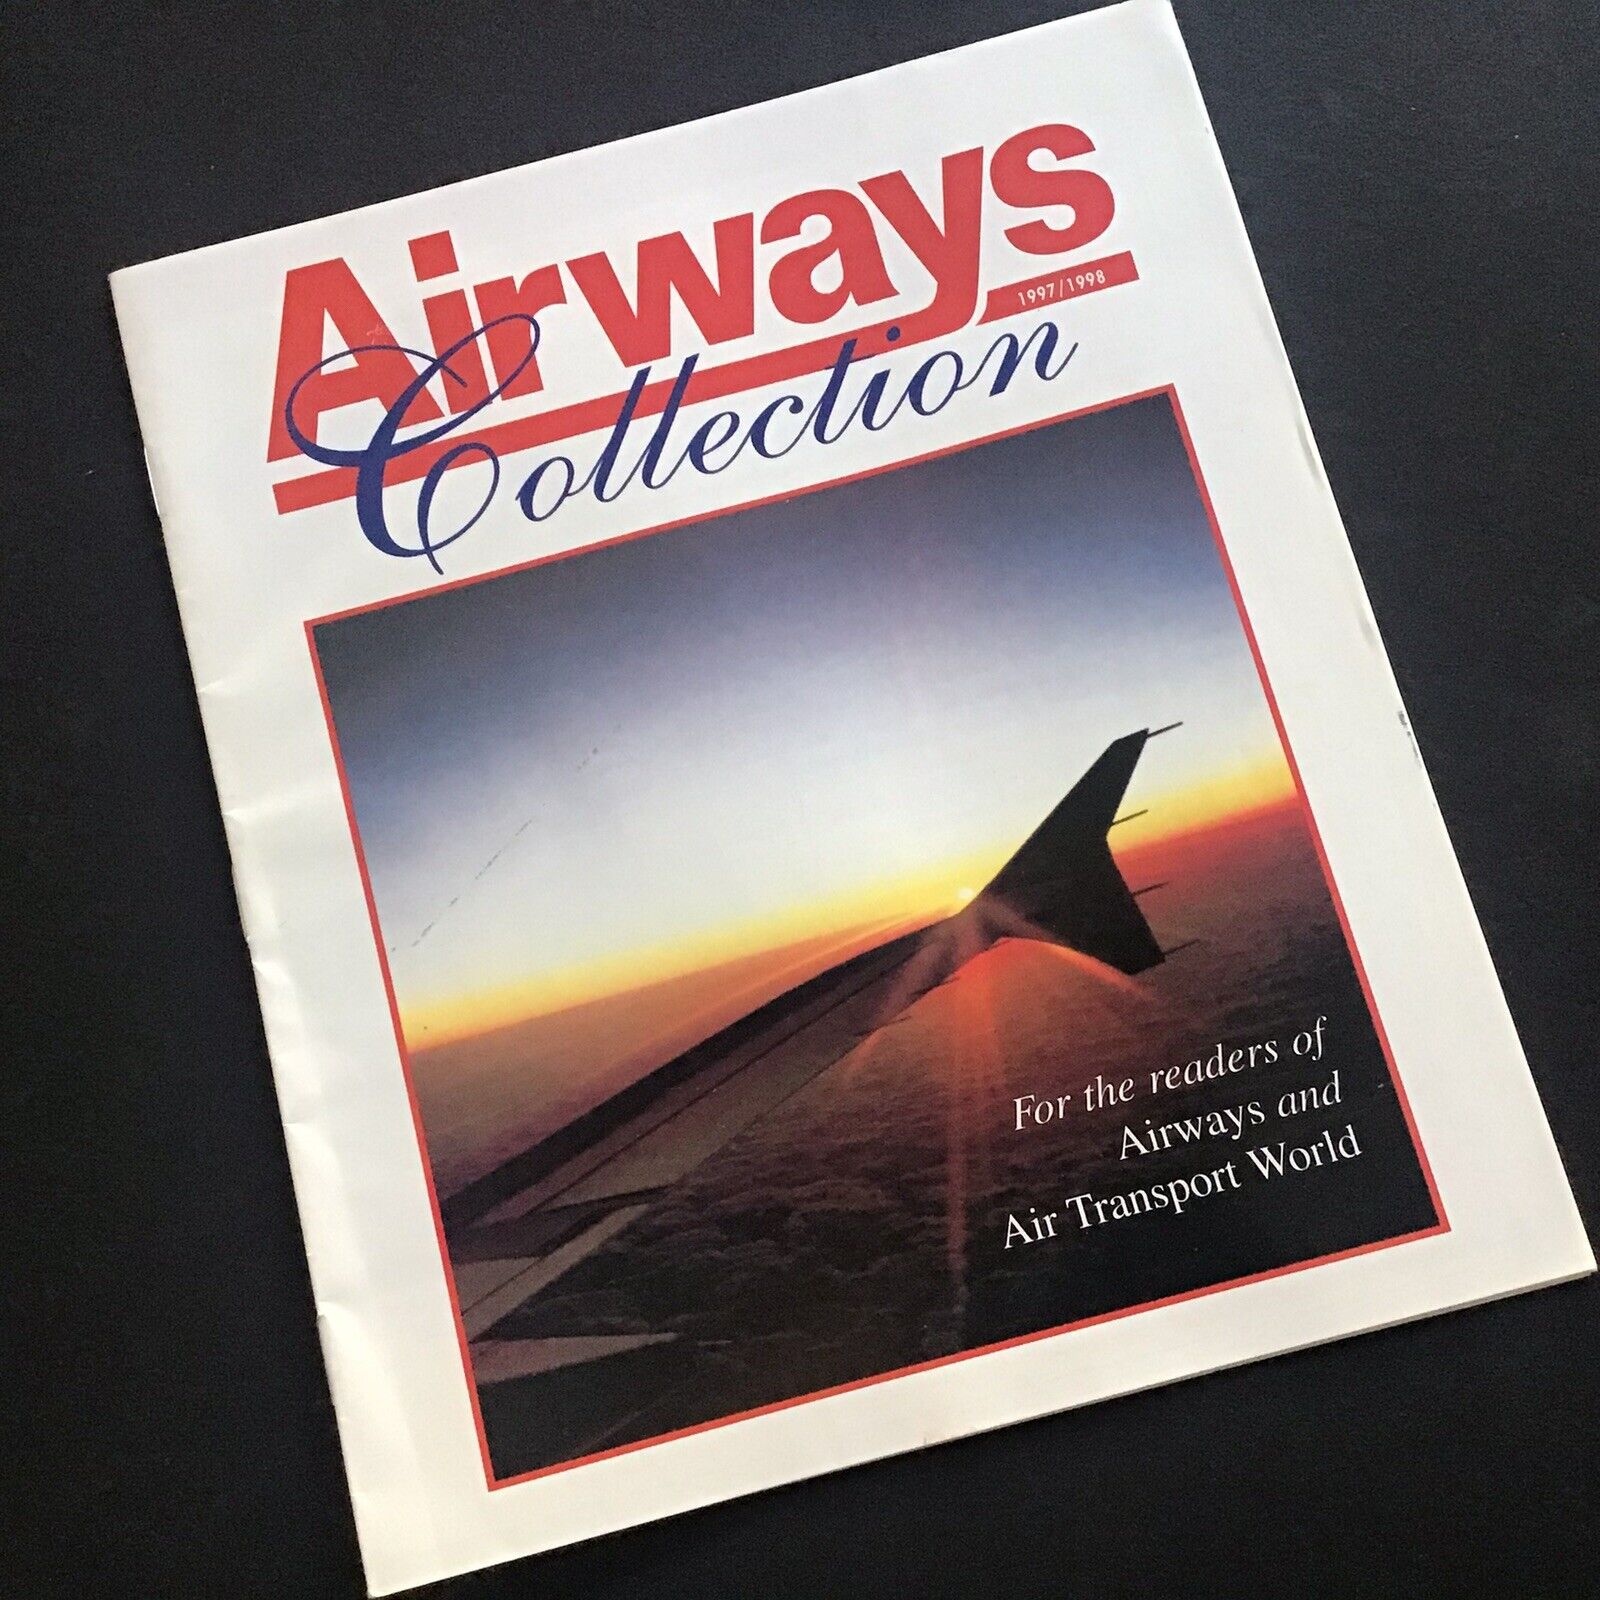 Airways Collection / Air Transport World Magazine 1997 Book Collection